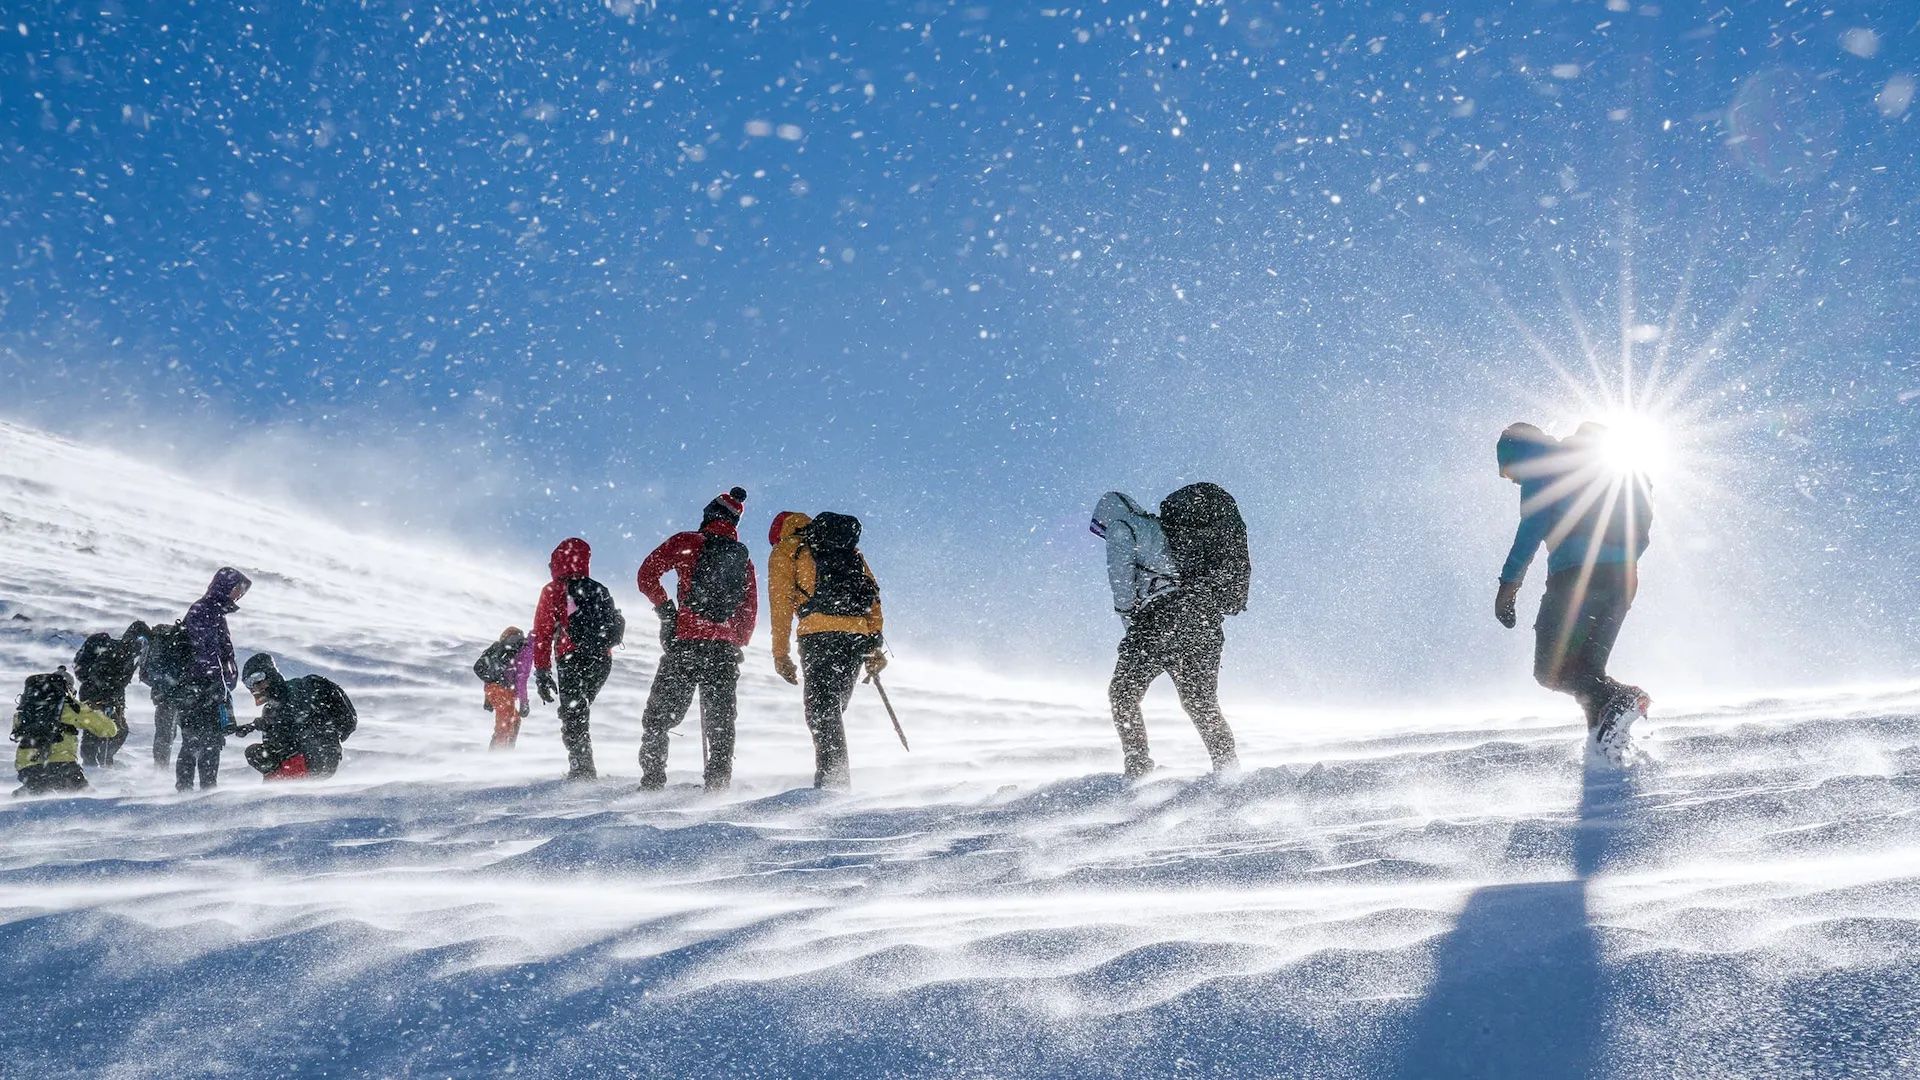 Climbers ascending Mount Toubkal, Morocco, during the snow